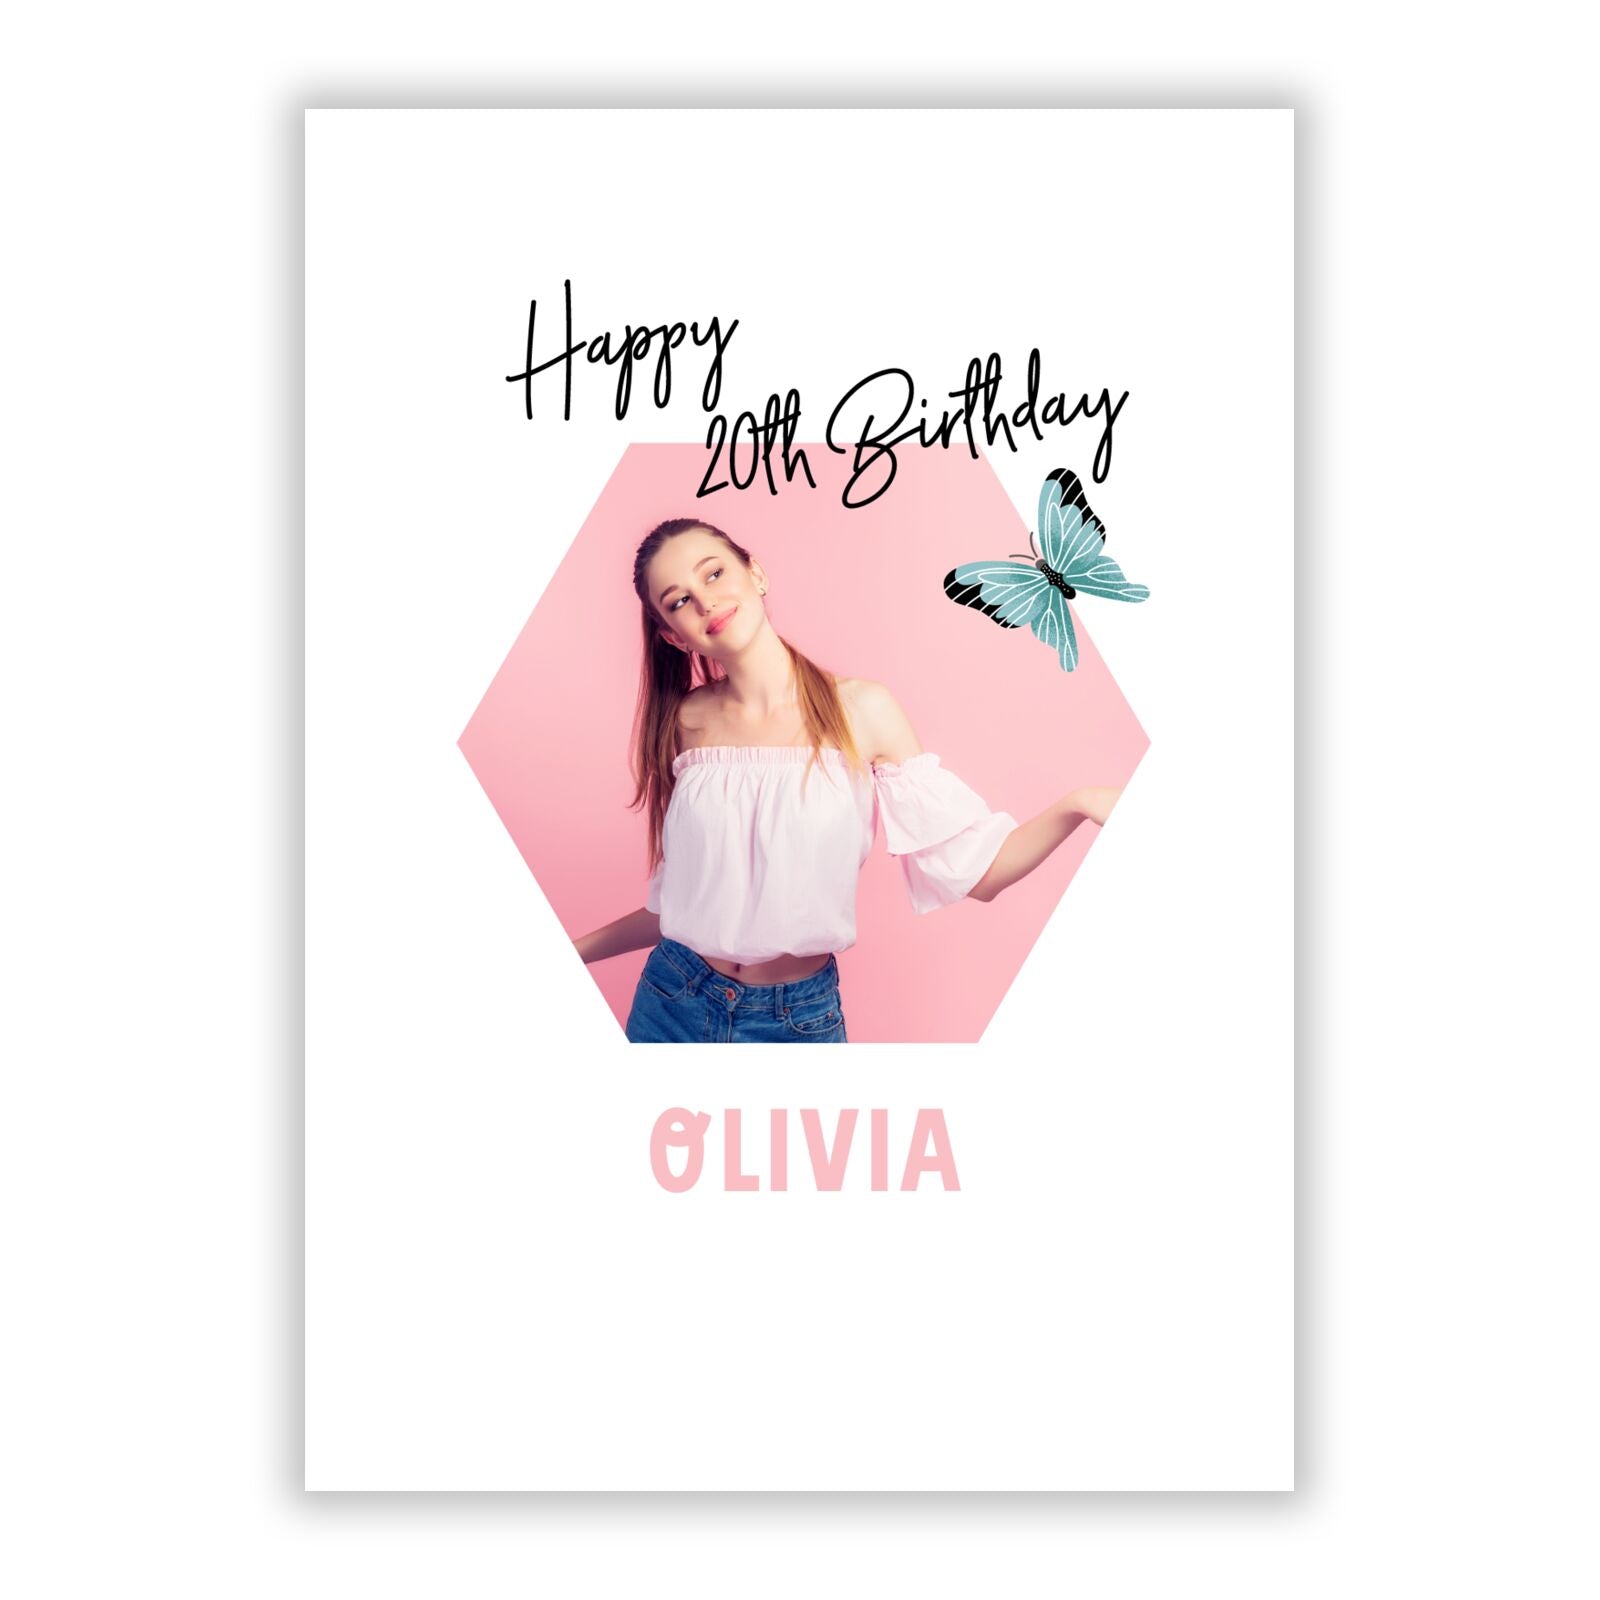 Hexagon Birthday Photo with Name A5 Flat Greetings Card